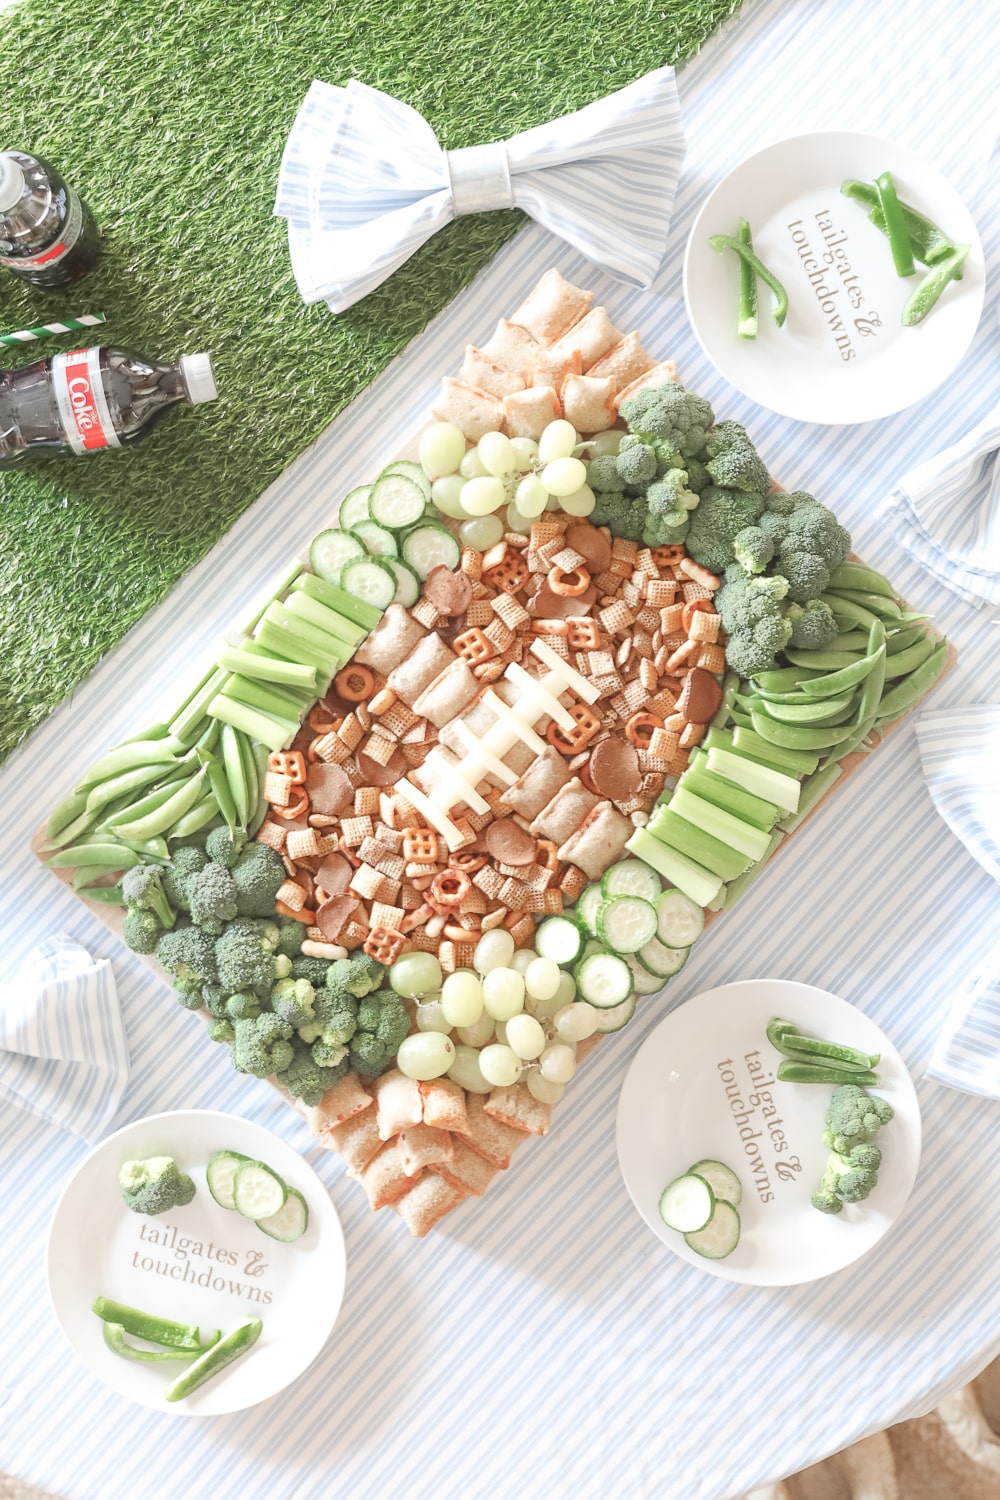 Game Day snack board created by blogger Stephanie Ziajka on Diary of a Debutante